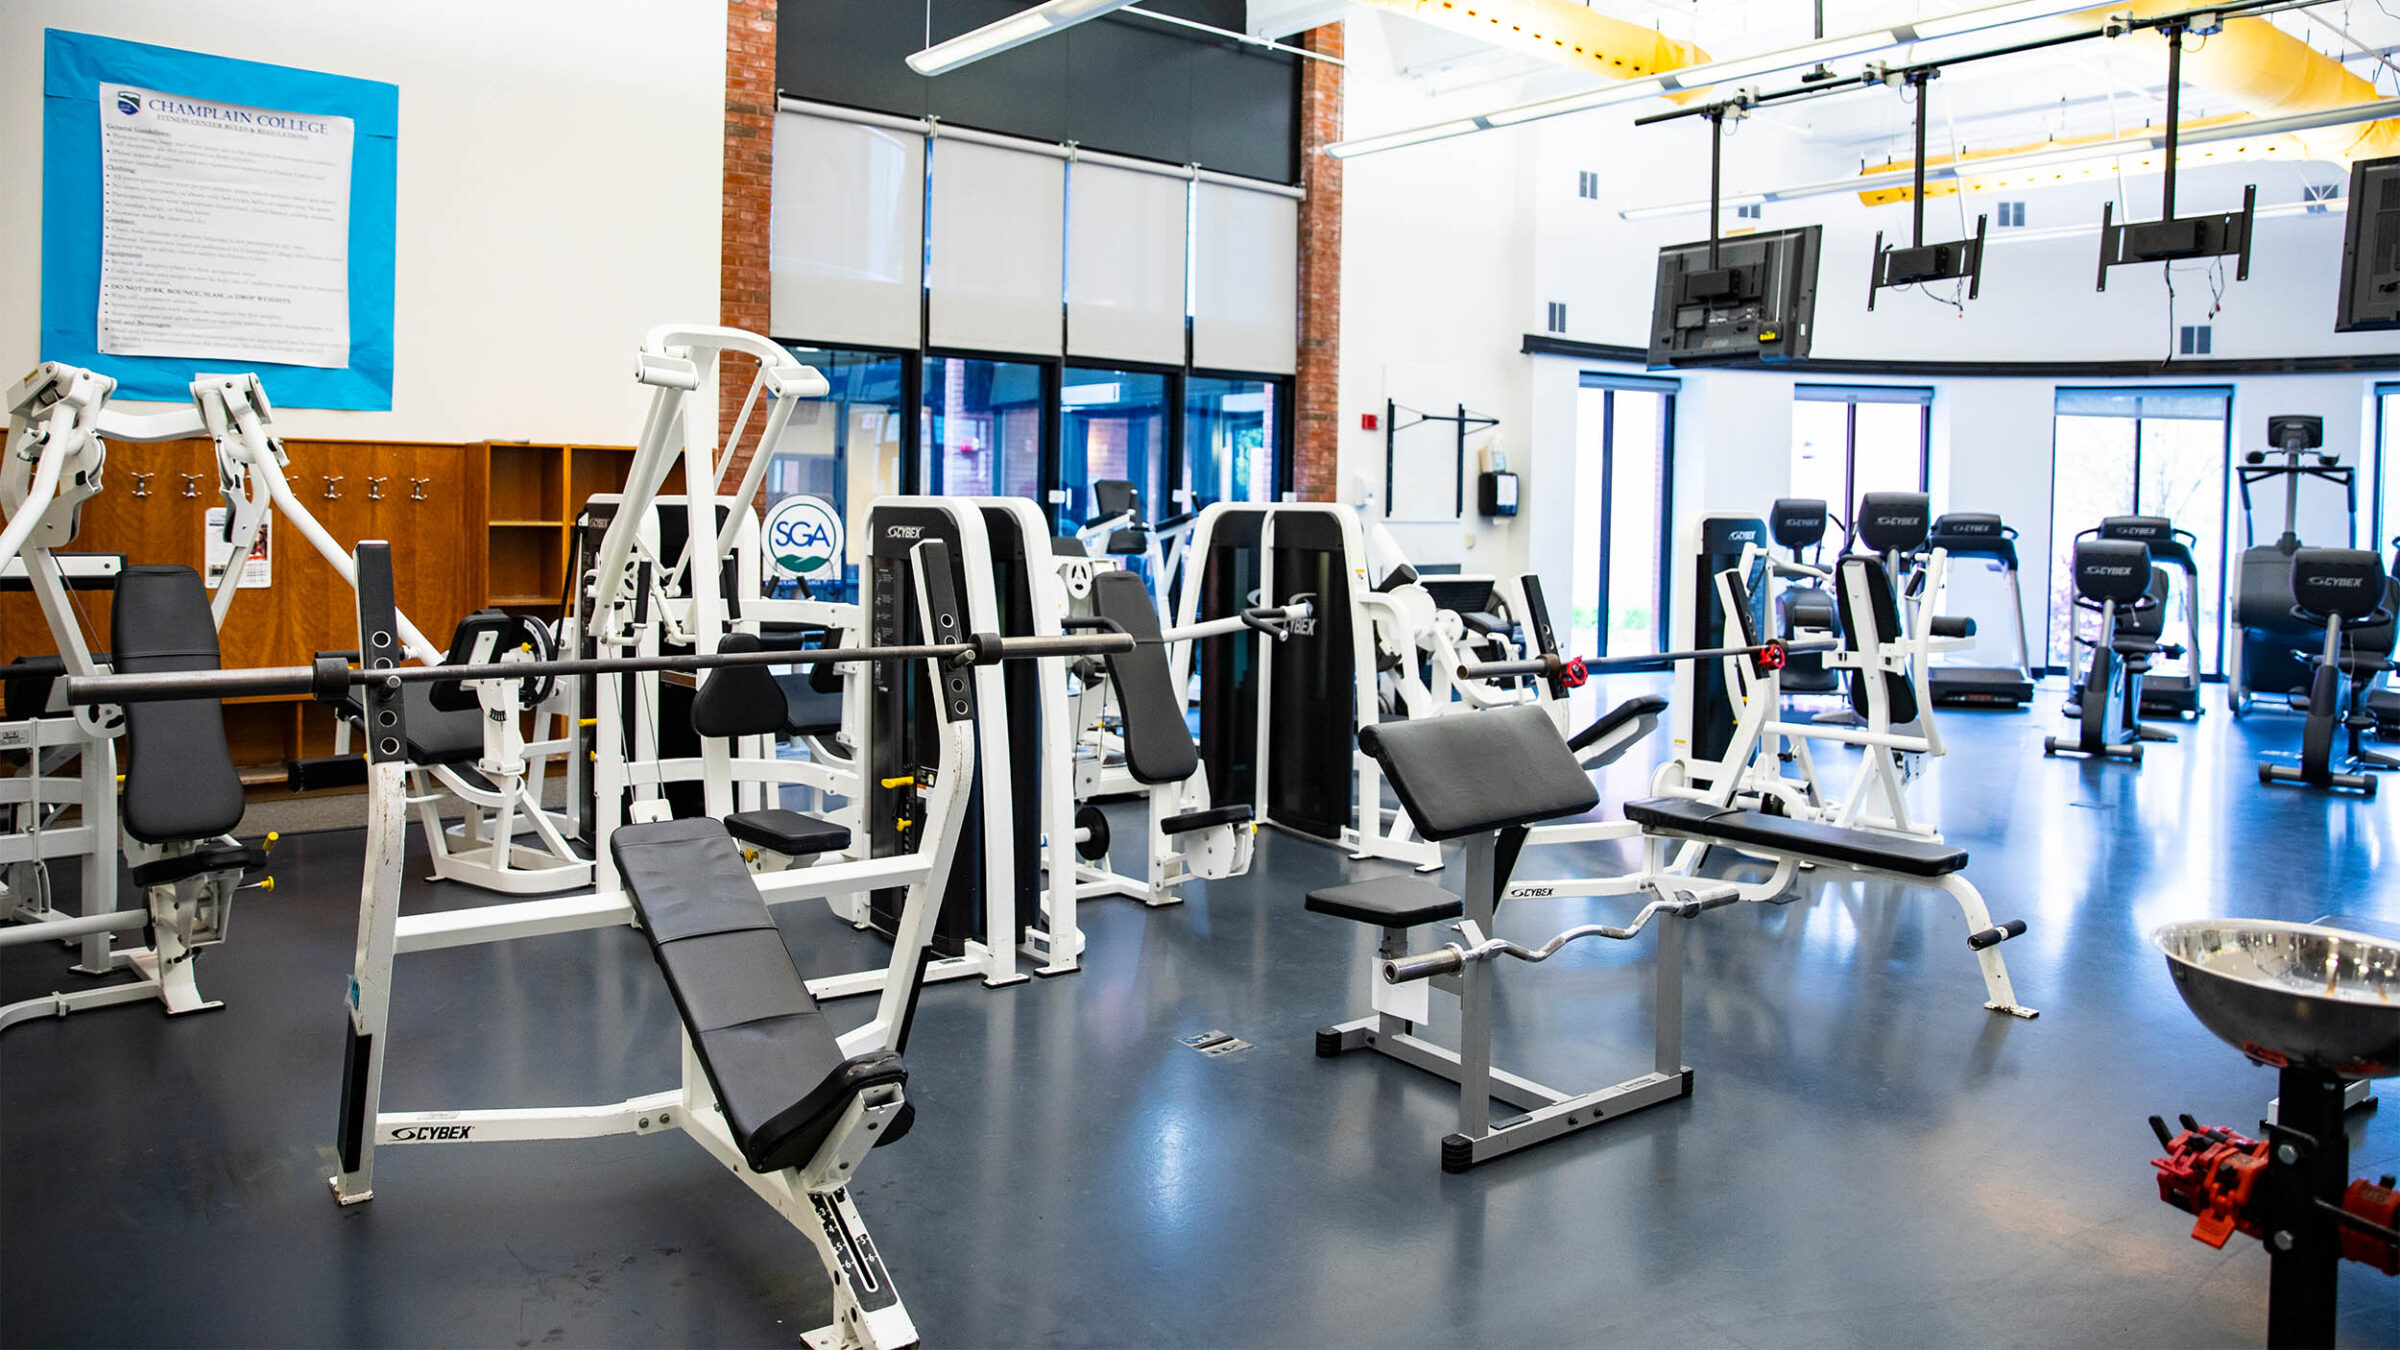 interior shot of the college fitness center